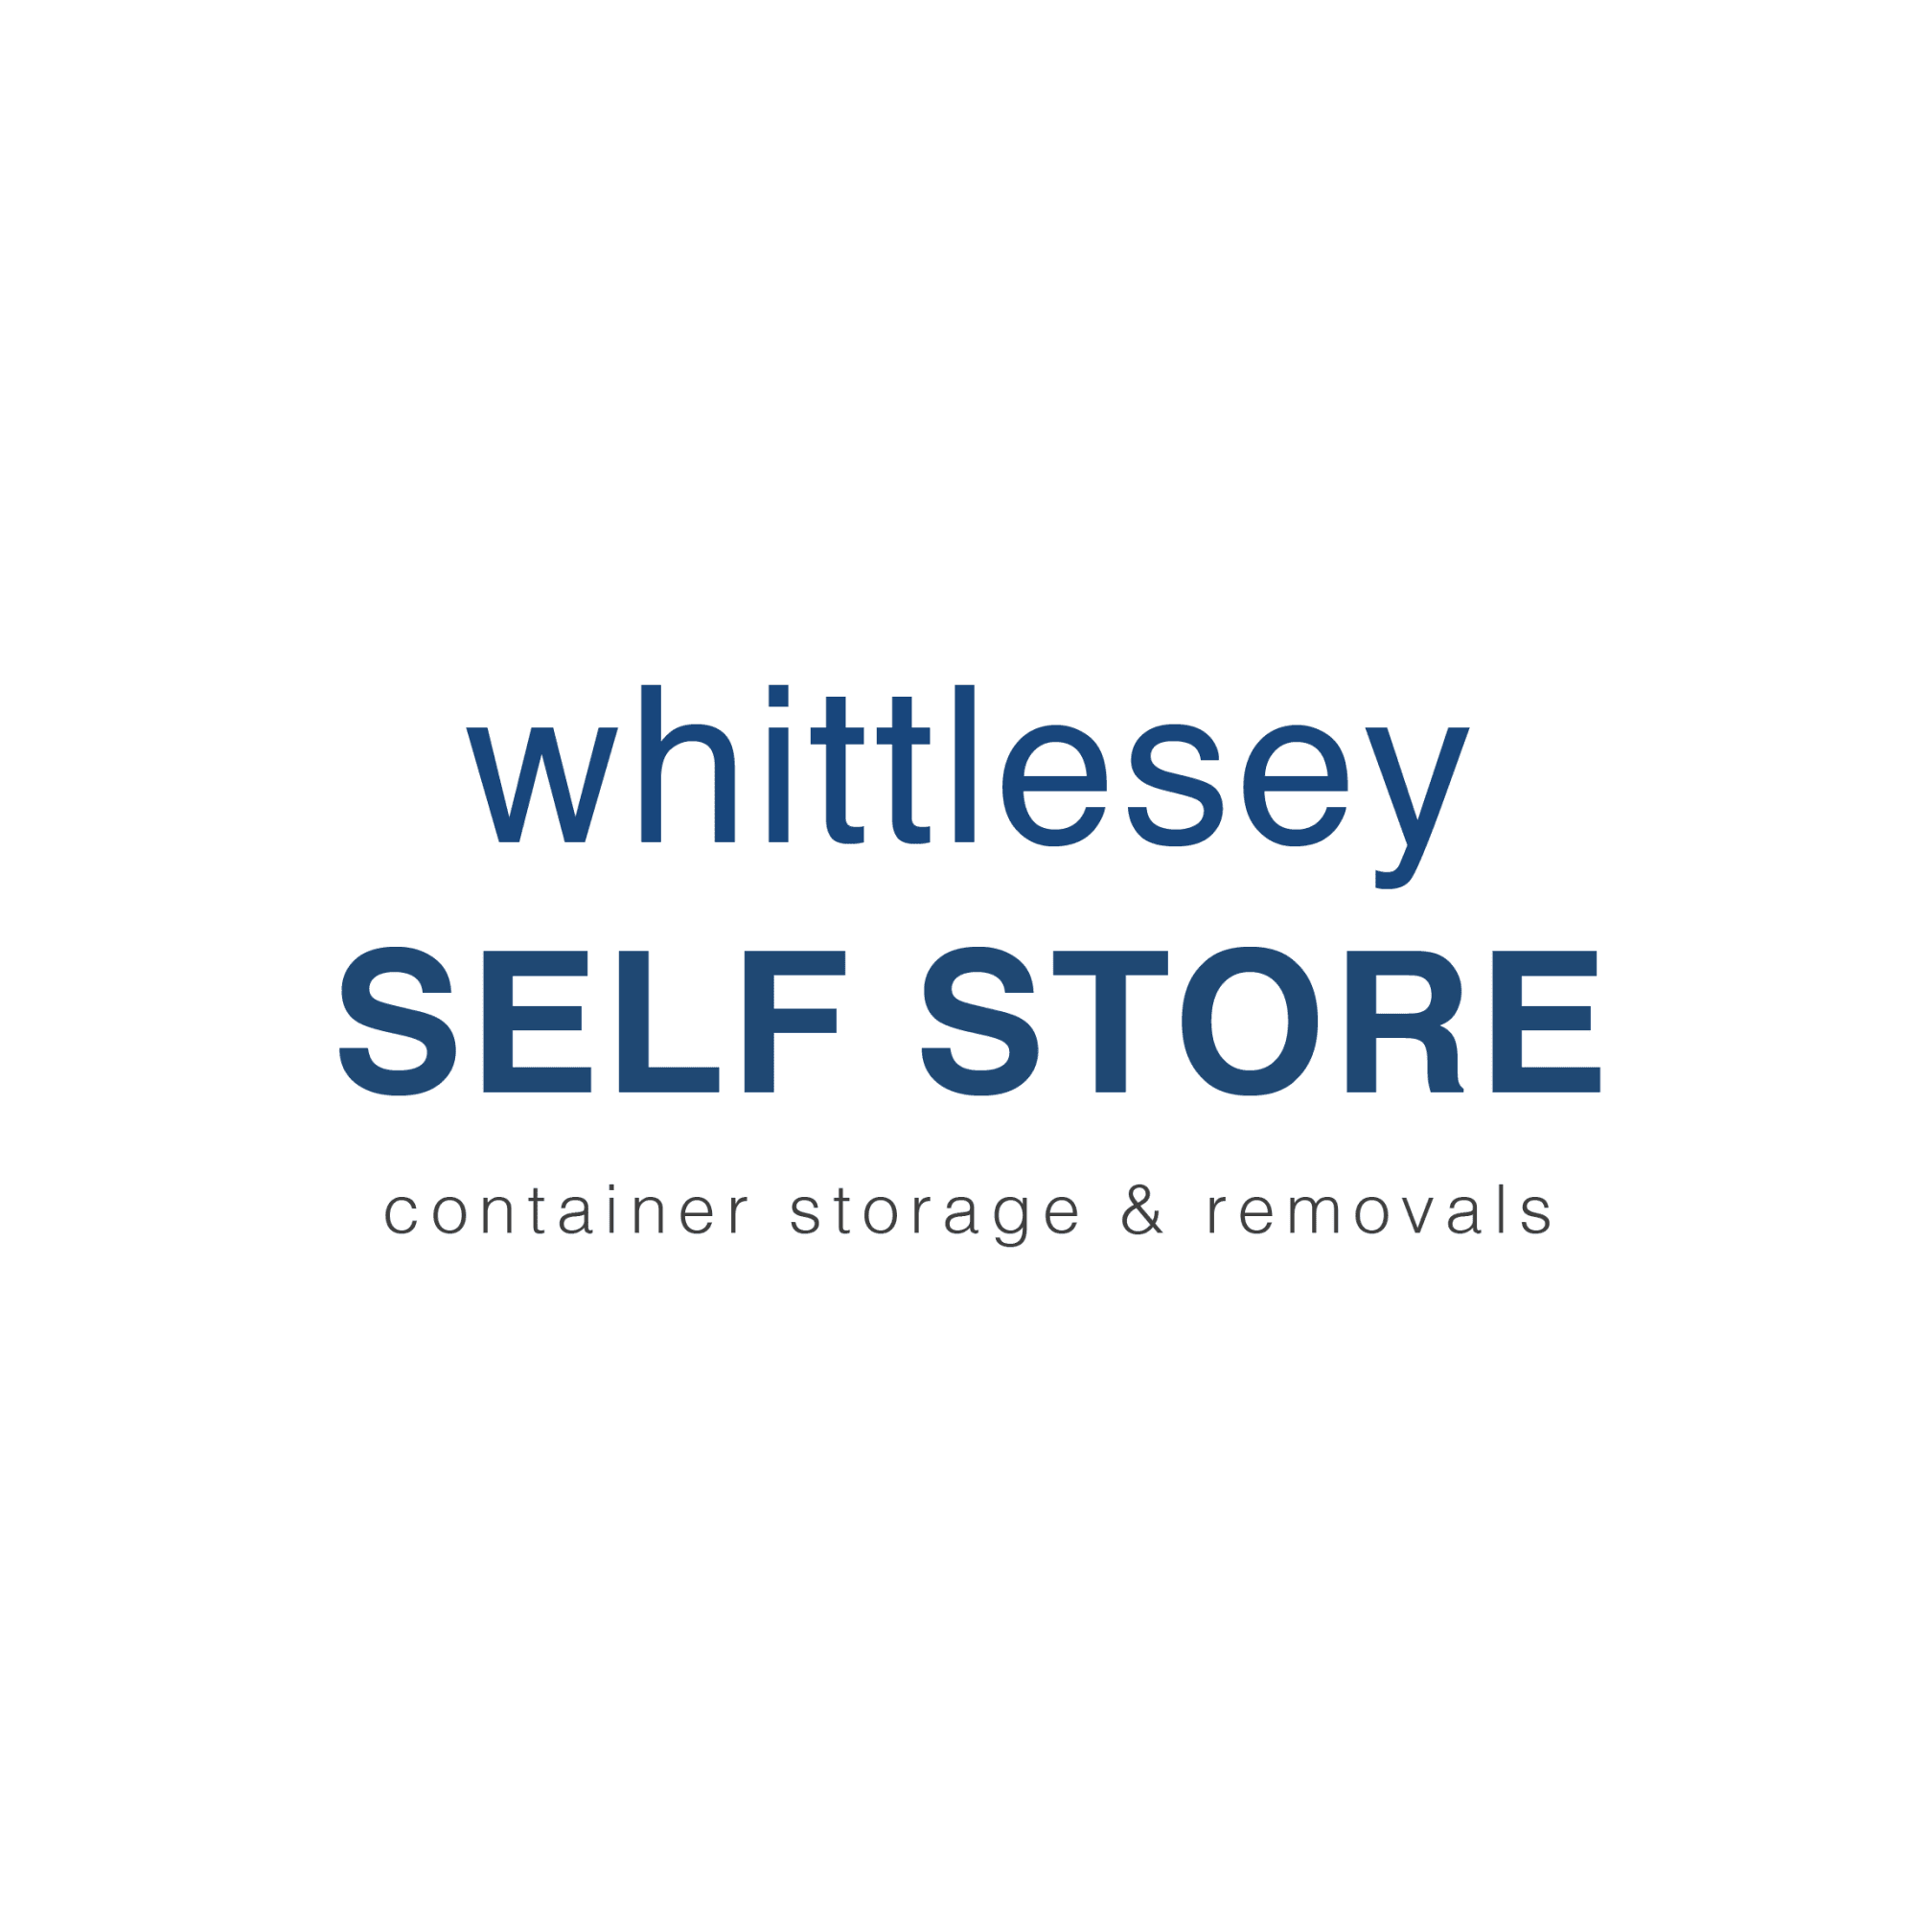 Whittlesey Self Store Logo